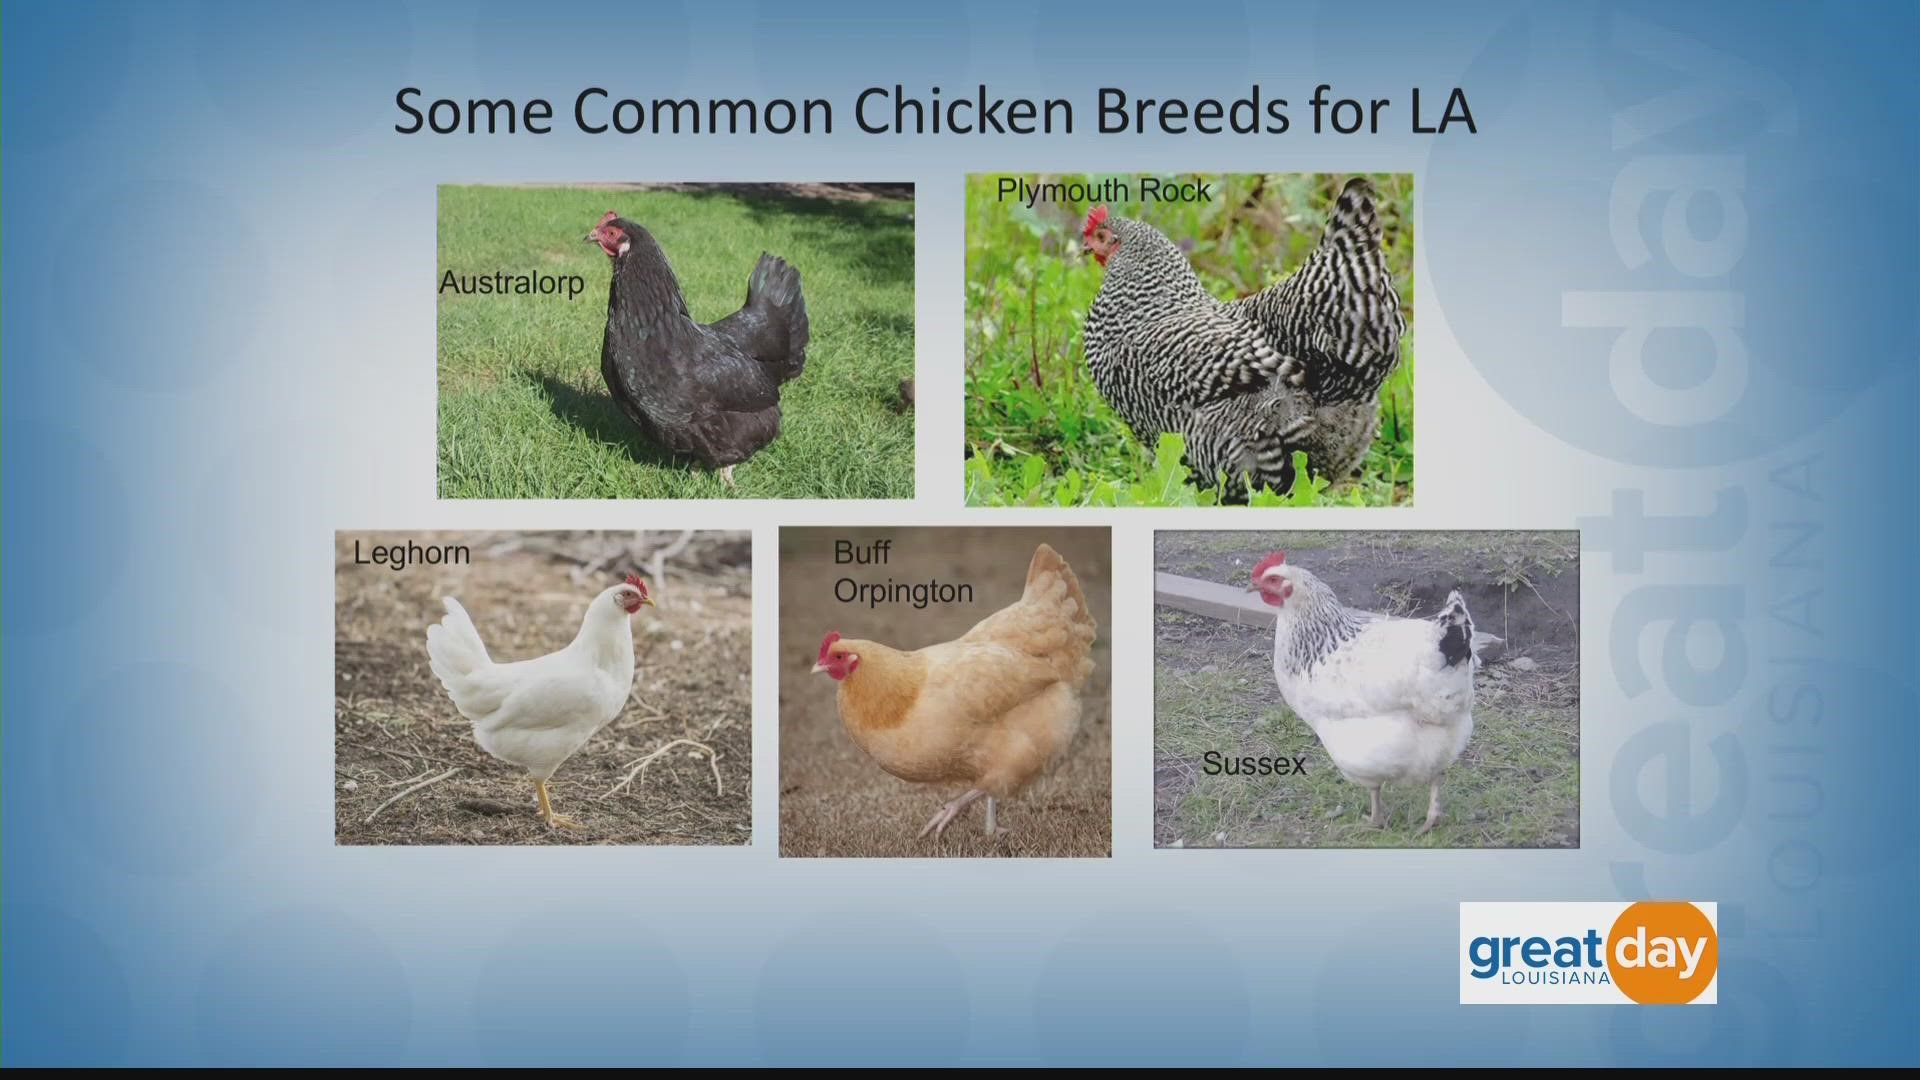 The LSU AgCenter talks about what's required to raise your own chickens.